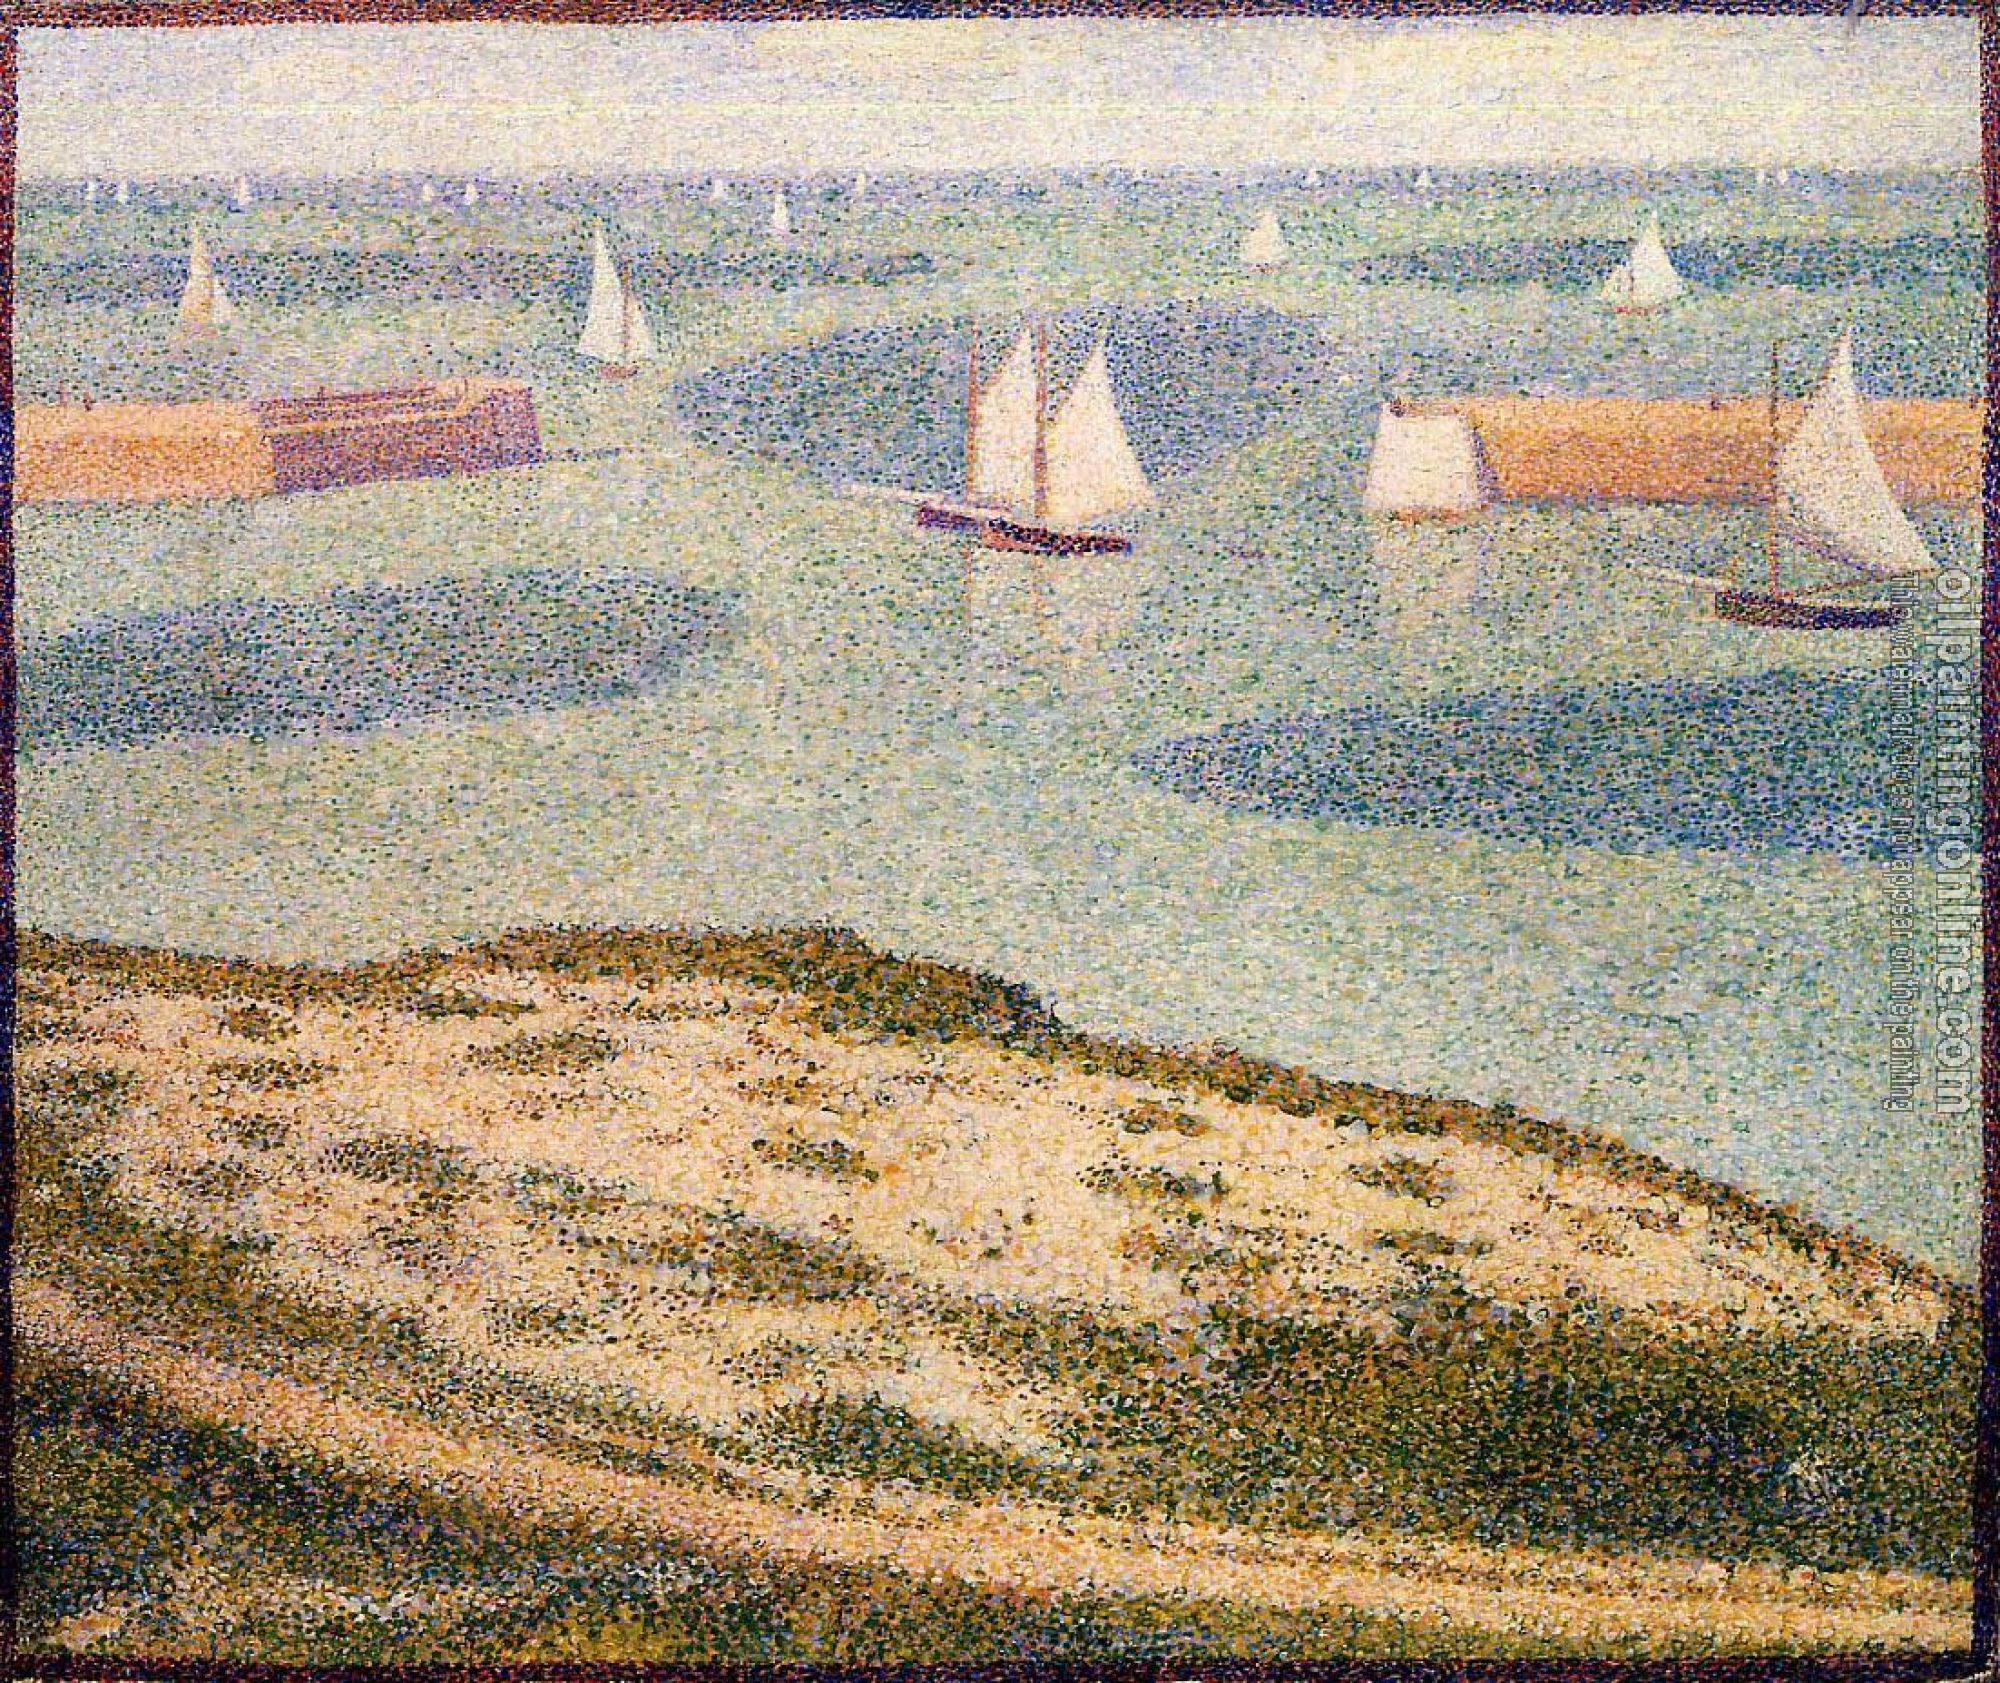 Seurat, Georges - Port-en-Bessin, Entrance to the Outer Harbor